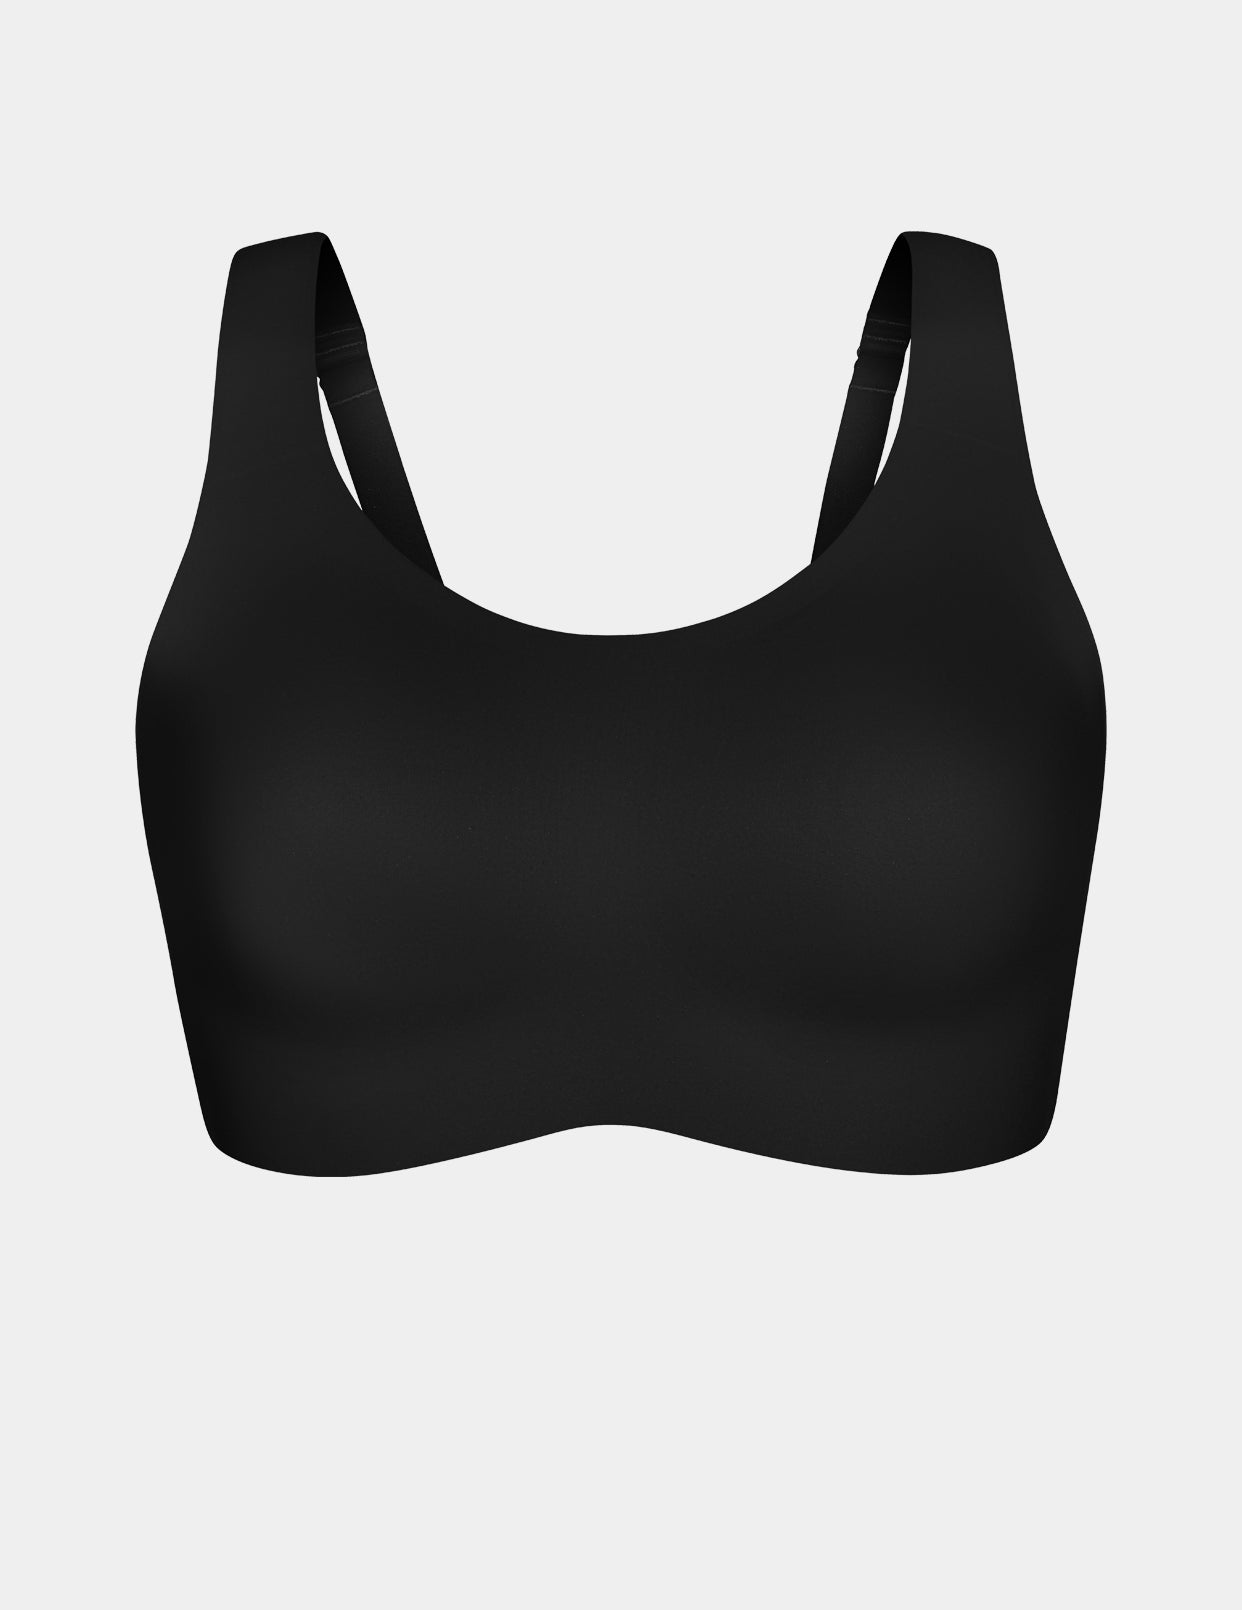 Knix LuxeLift Pullover Bra on Marmalade